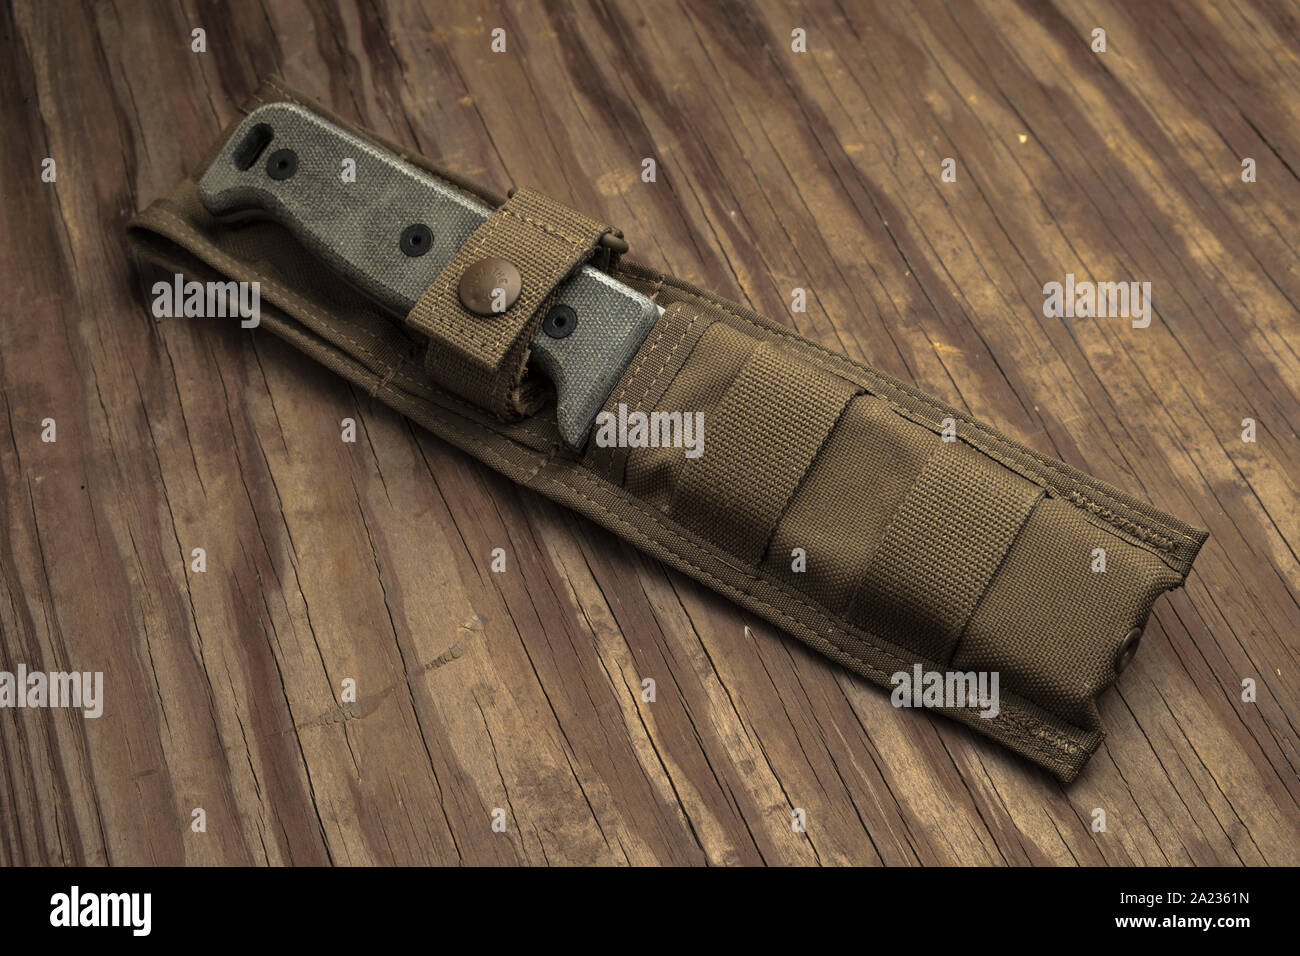 Heavy blade survival knife and carrying sheath. Stock Photo